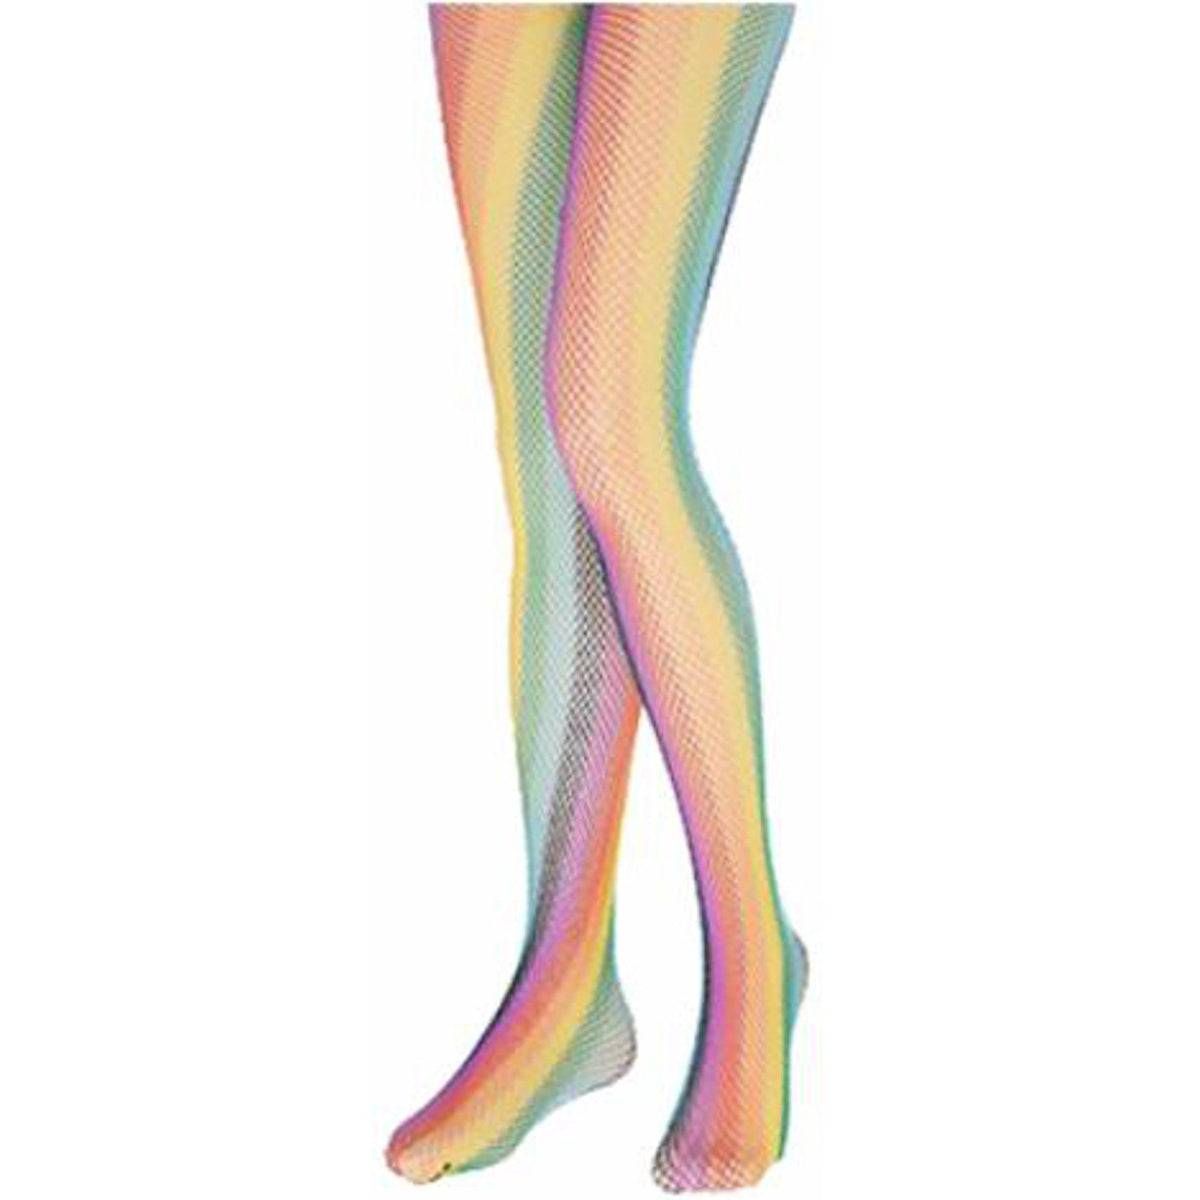 Rainbow Fishnet Tights - One Size. — Shimmer & Confetti